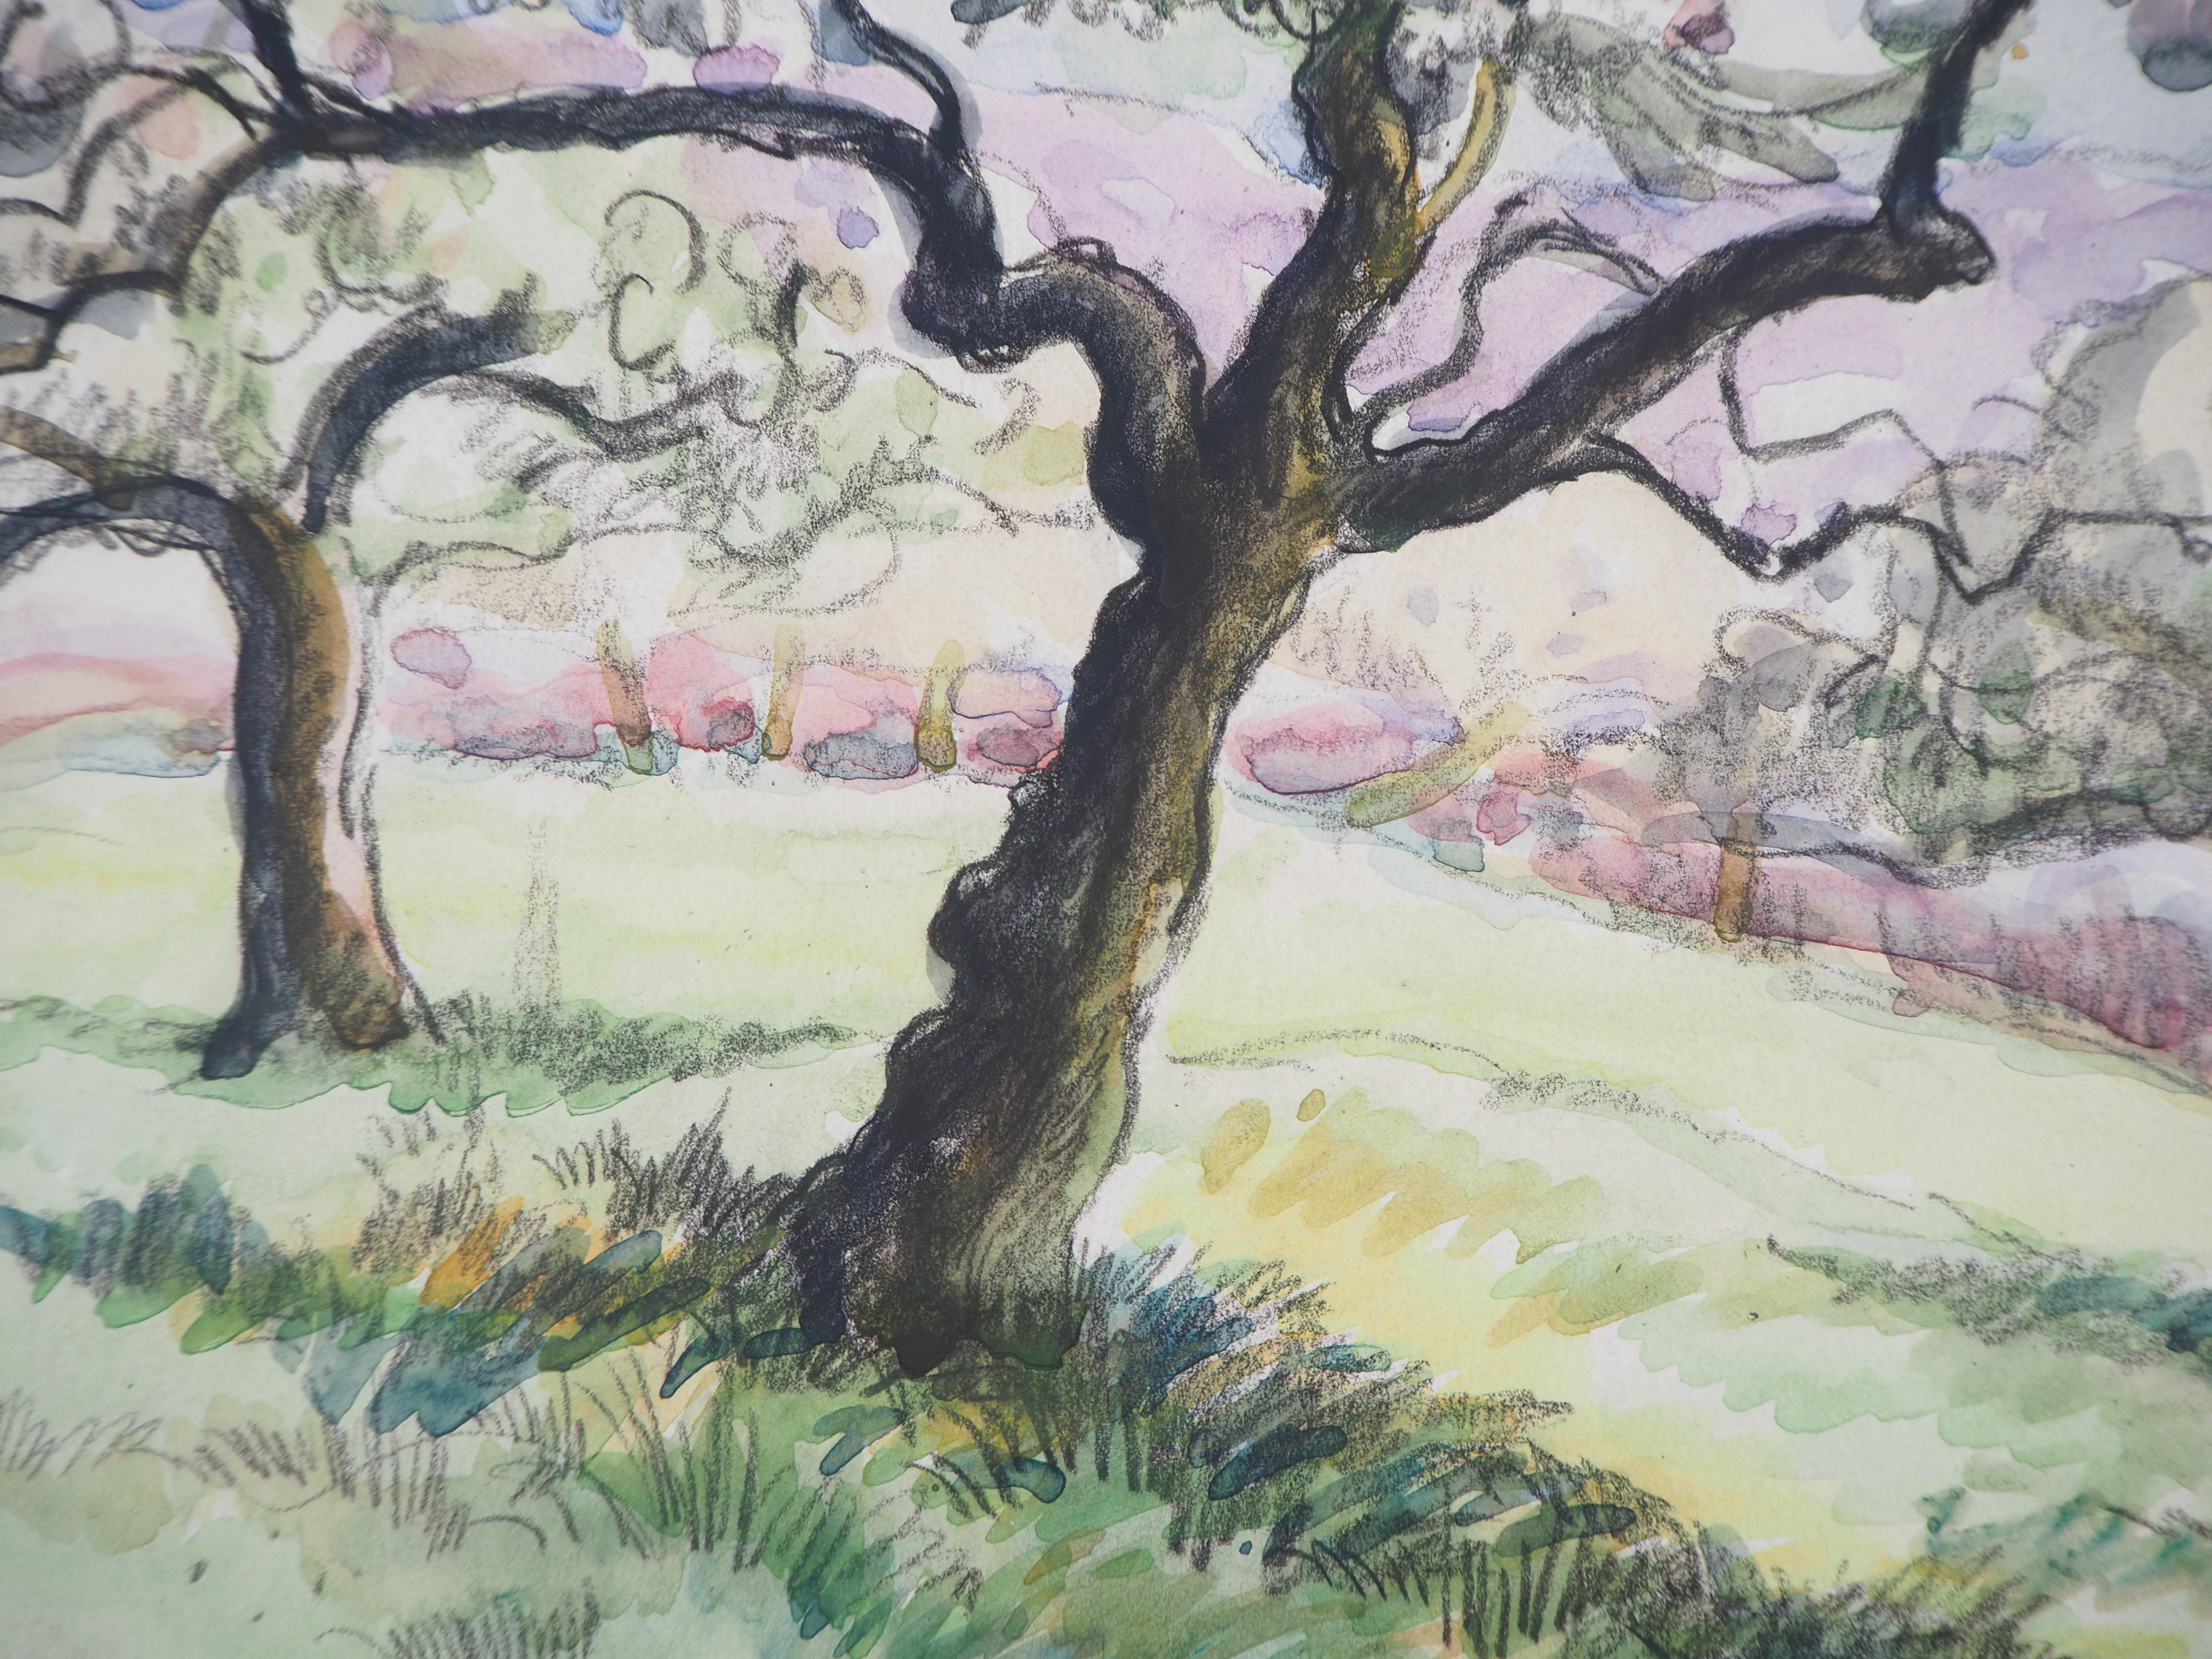 Normandy : Apple Trees in Blossom - Original watercolor painting - Signed - Gray Landscape Art by Paul Emile Pissarro